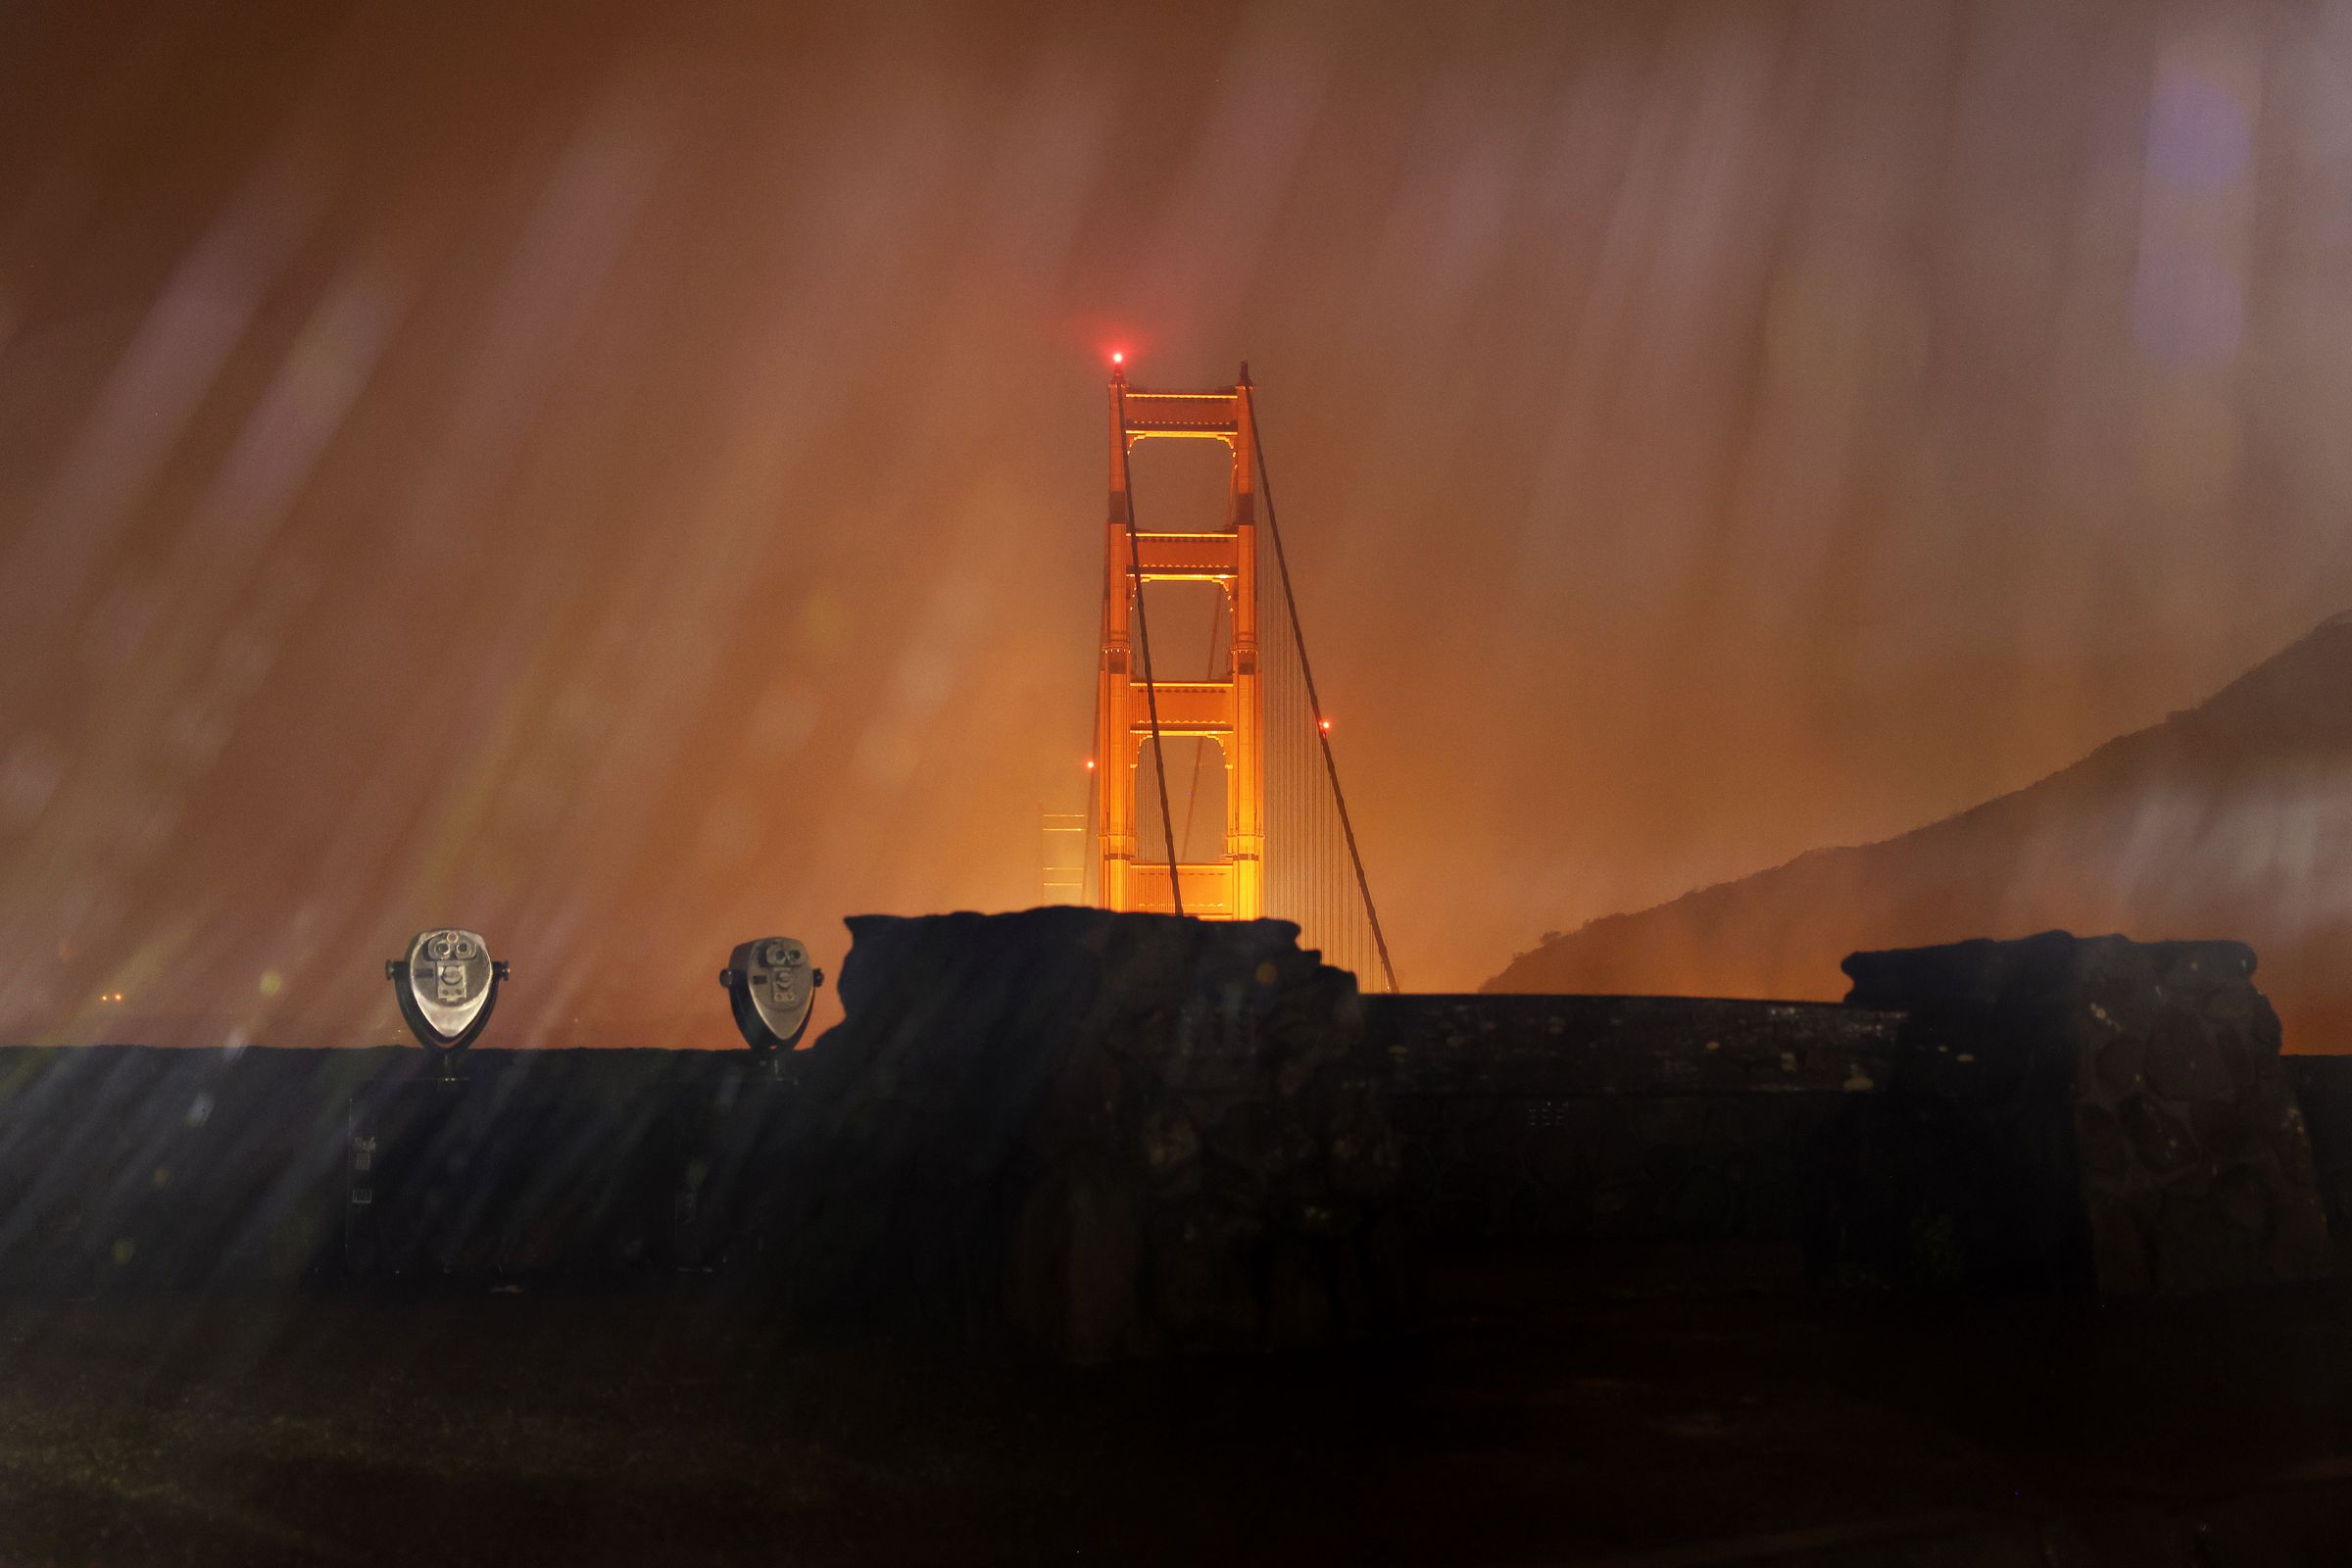 The Golden Gate Bridge is seen lit up at night in the rain.